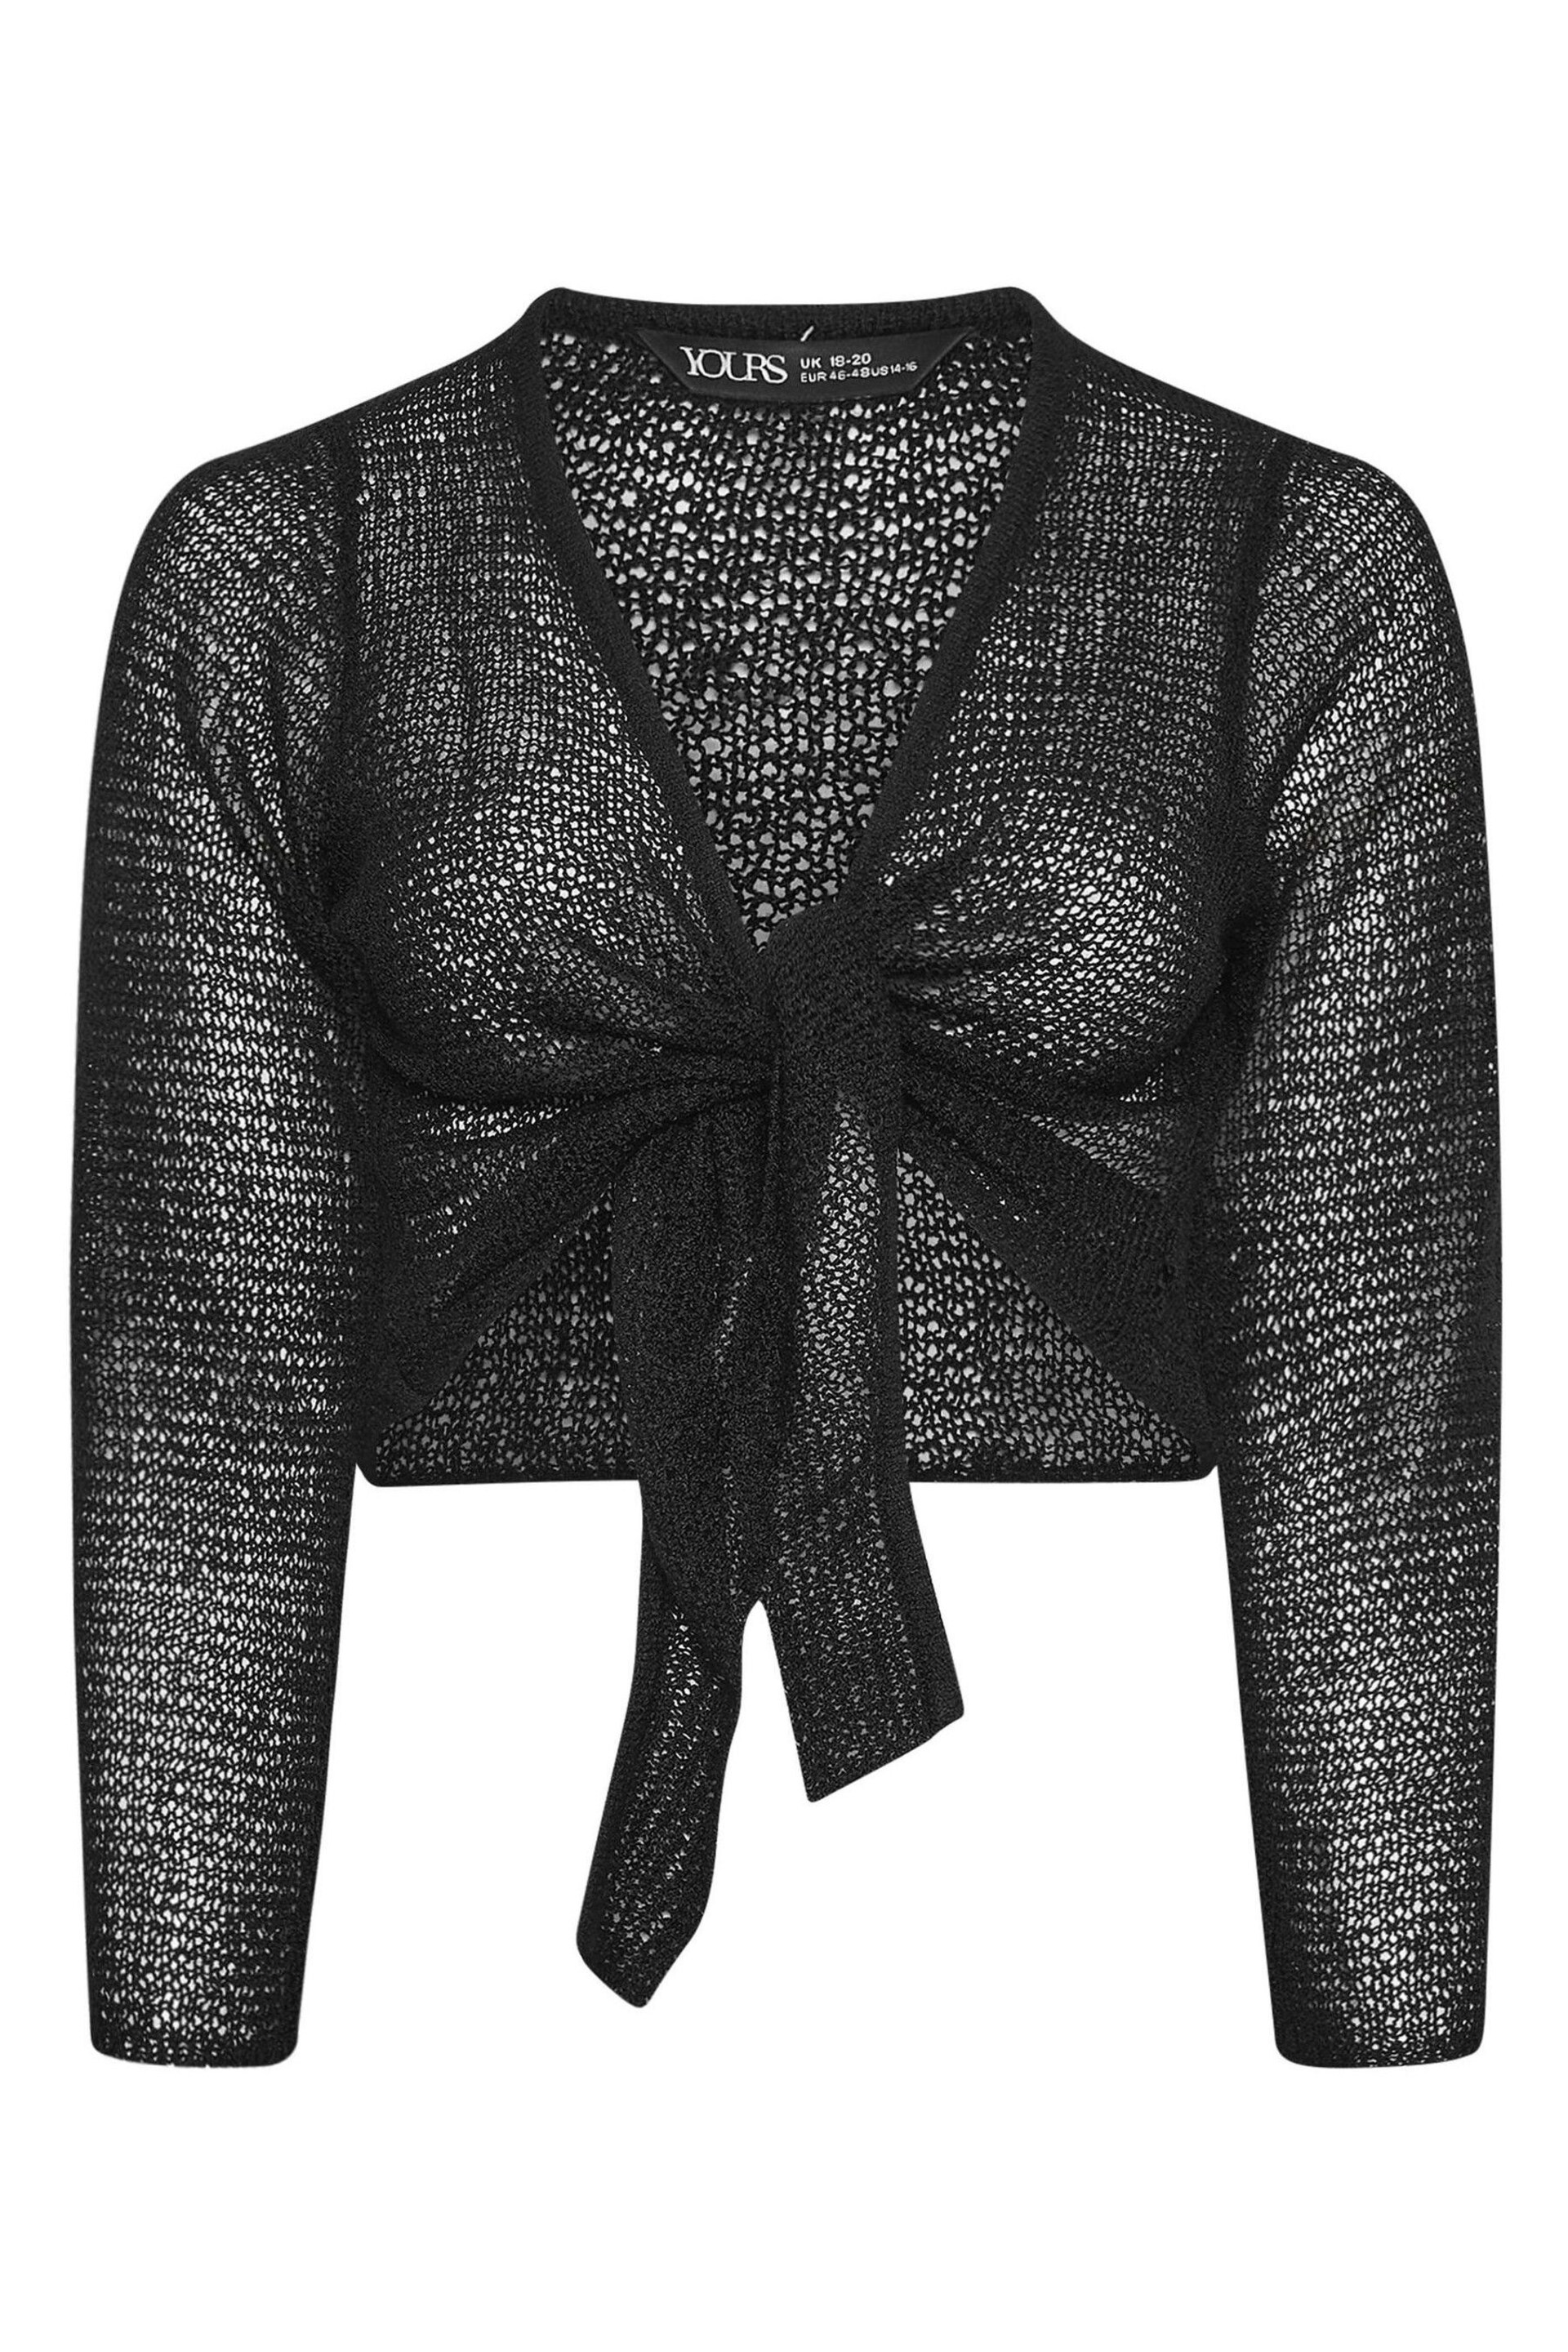 Yours Curve Black Crochet Tie Front Cardigan - Image 5 of 5